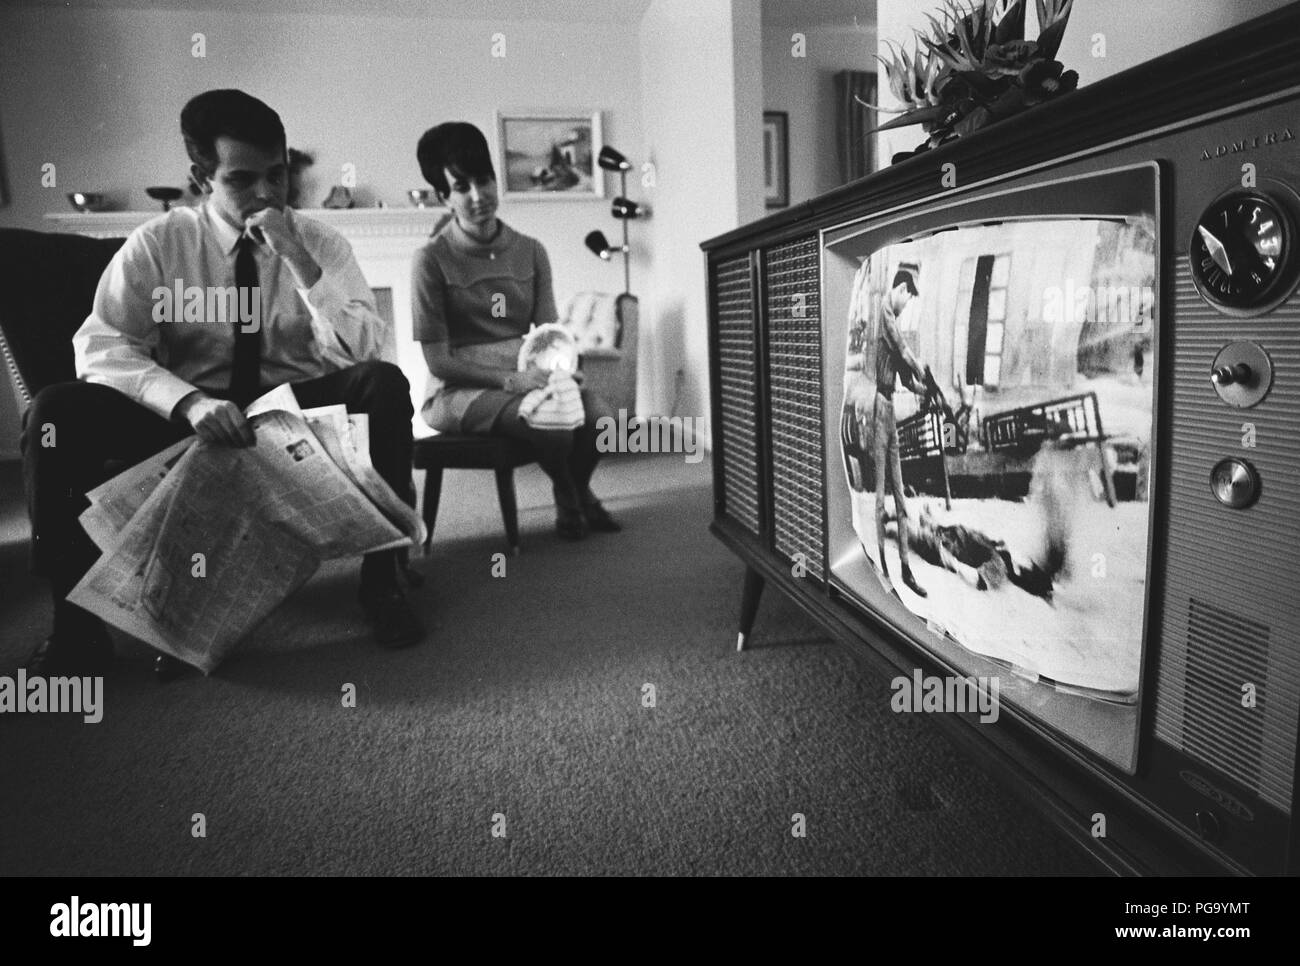 A man and a woman watching tv news film footage of the Vietnam war on a television in their living room Stock Photo